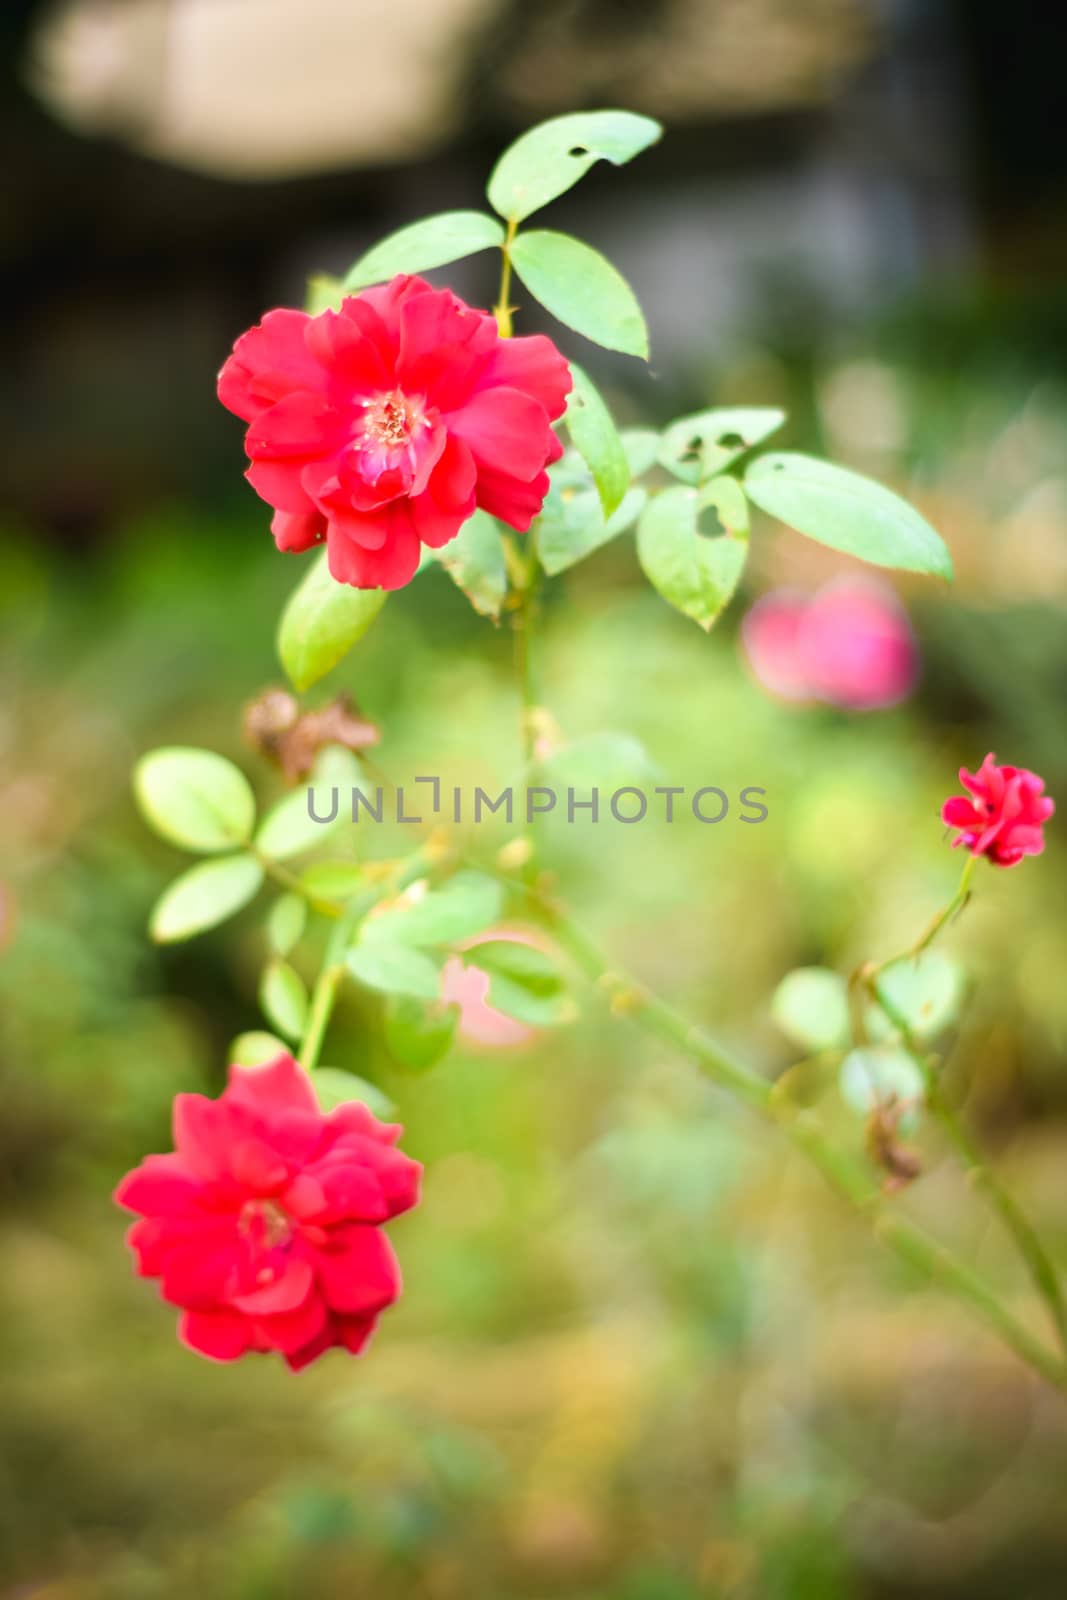 Close up beautiful many red rose on green branch. Rose and bud on garden. Valentines background. Pink rose with fresh leaves branches. Spring summer wedding romantic elegant date marriage symbol. by sudiptabhowmick